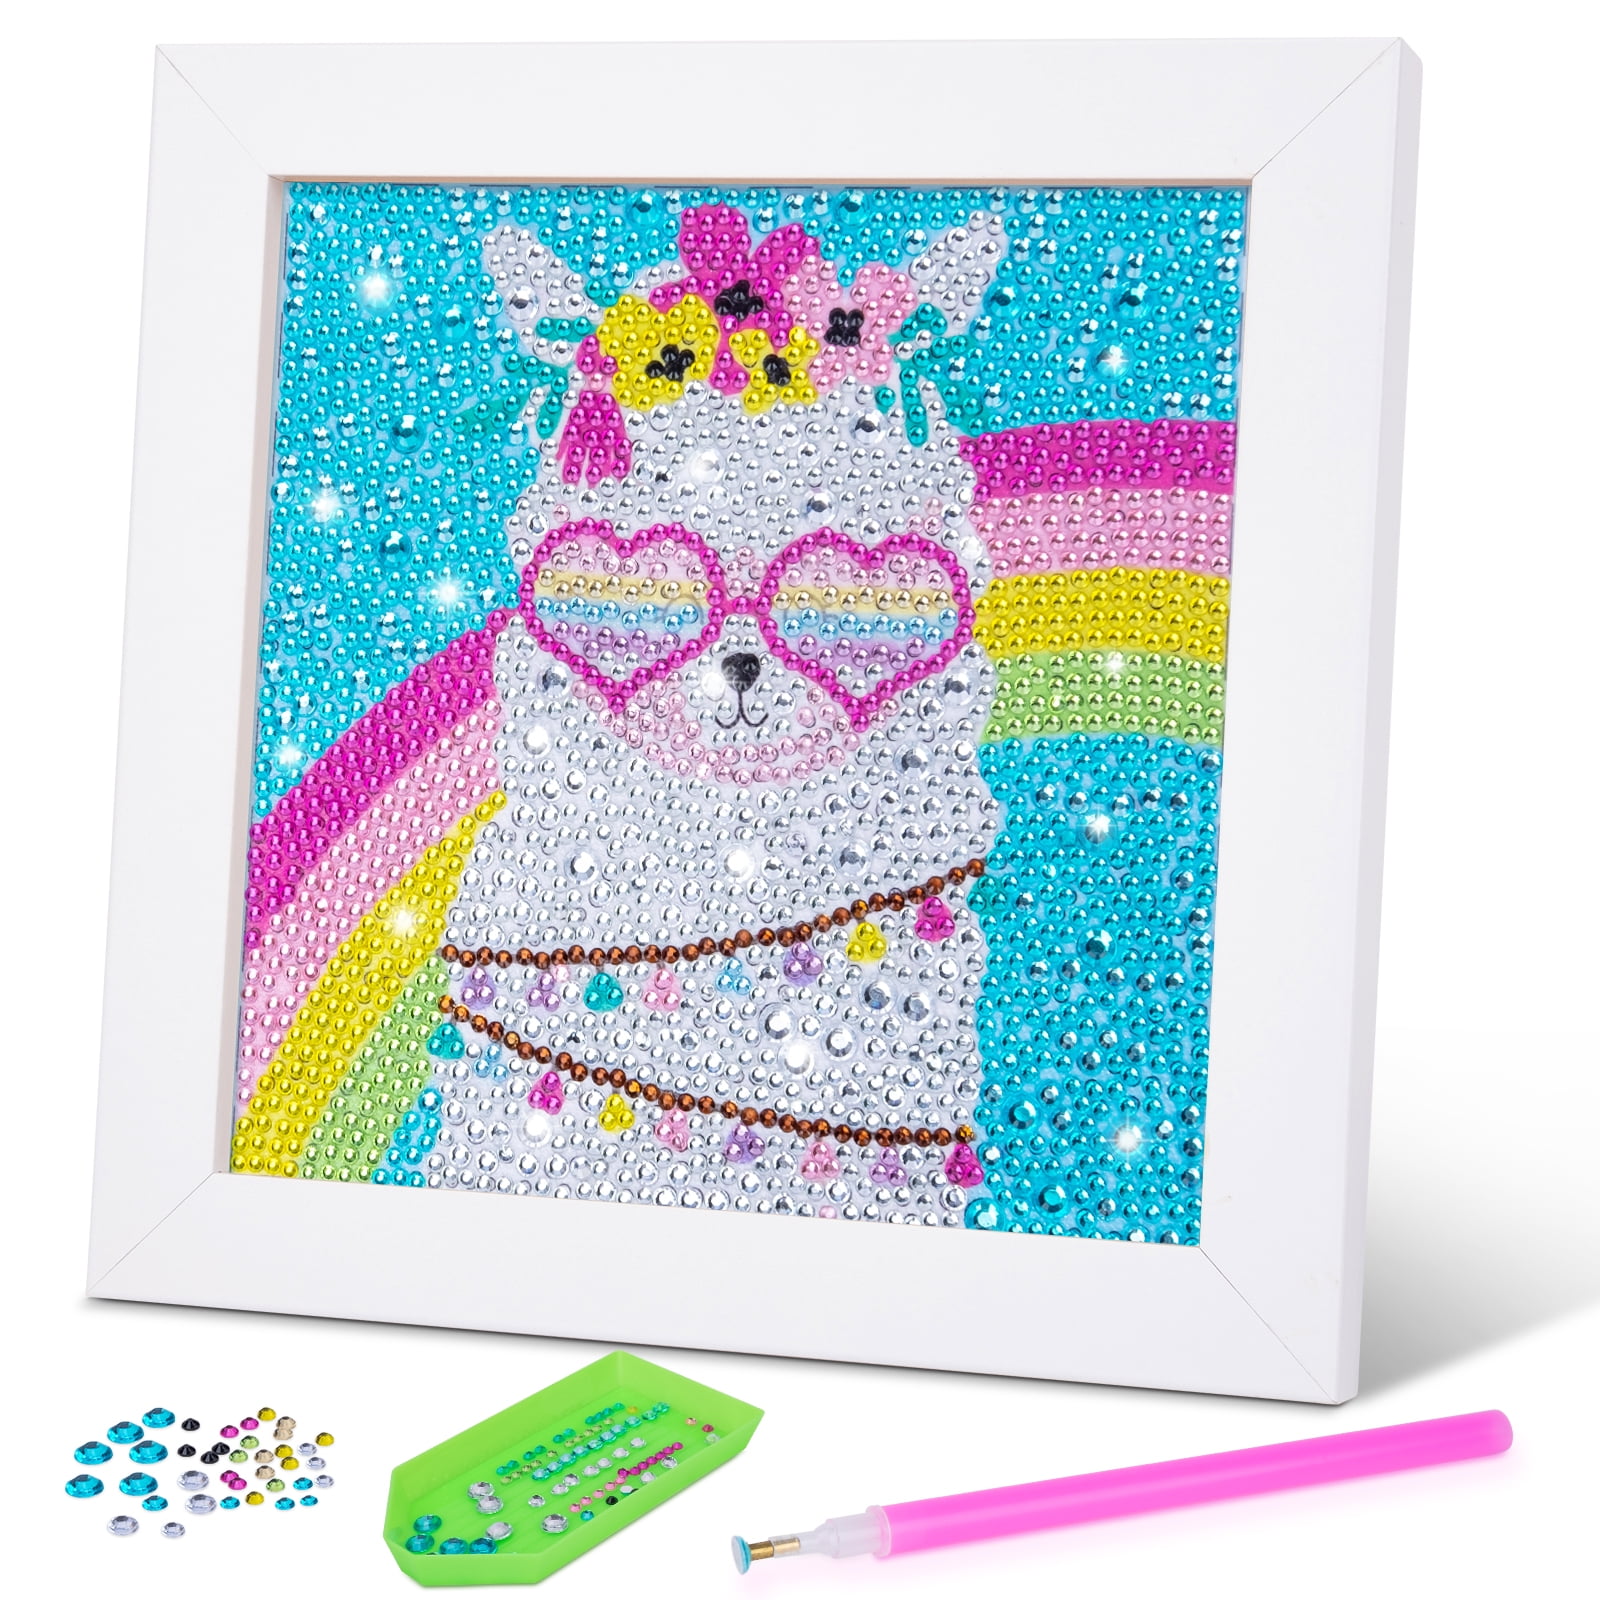 Dikence Crafts Gifts for 8 9 10 11 Years Old Girls, 5d Painting by